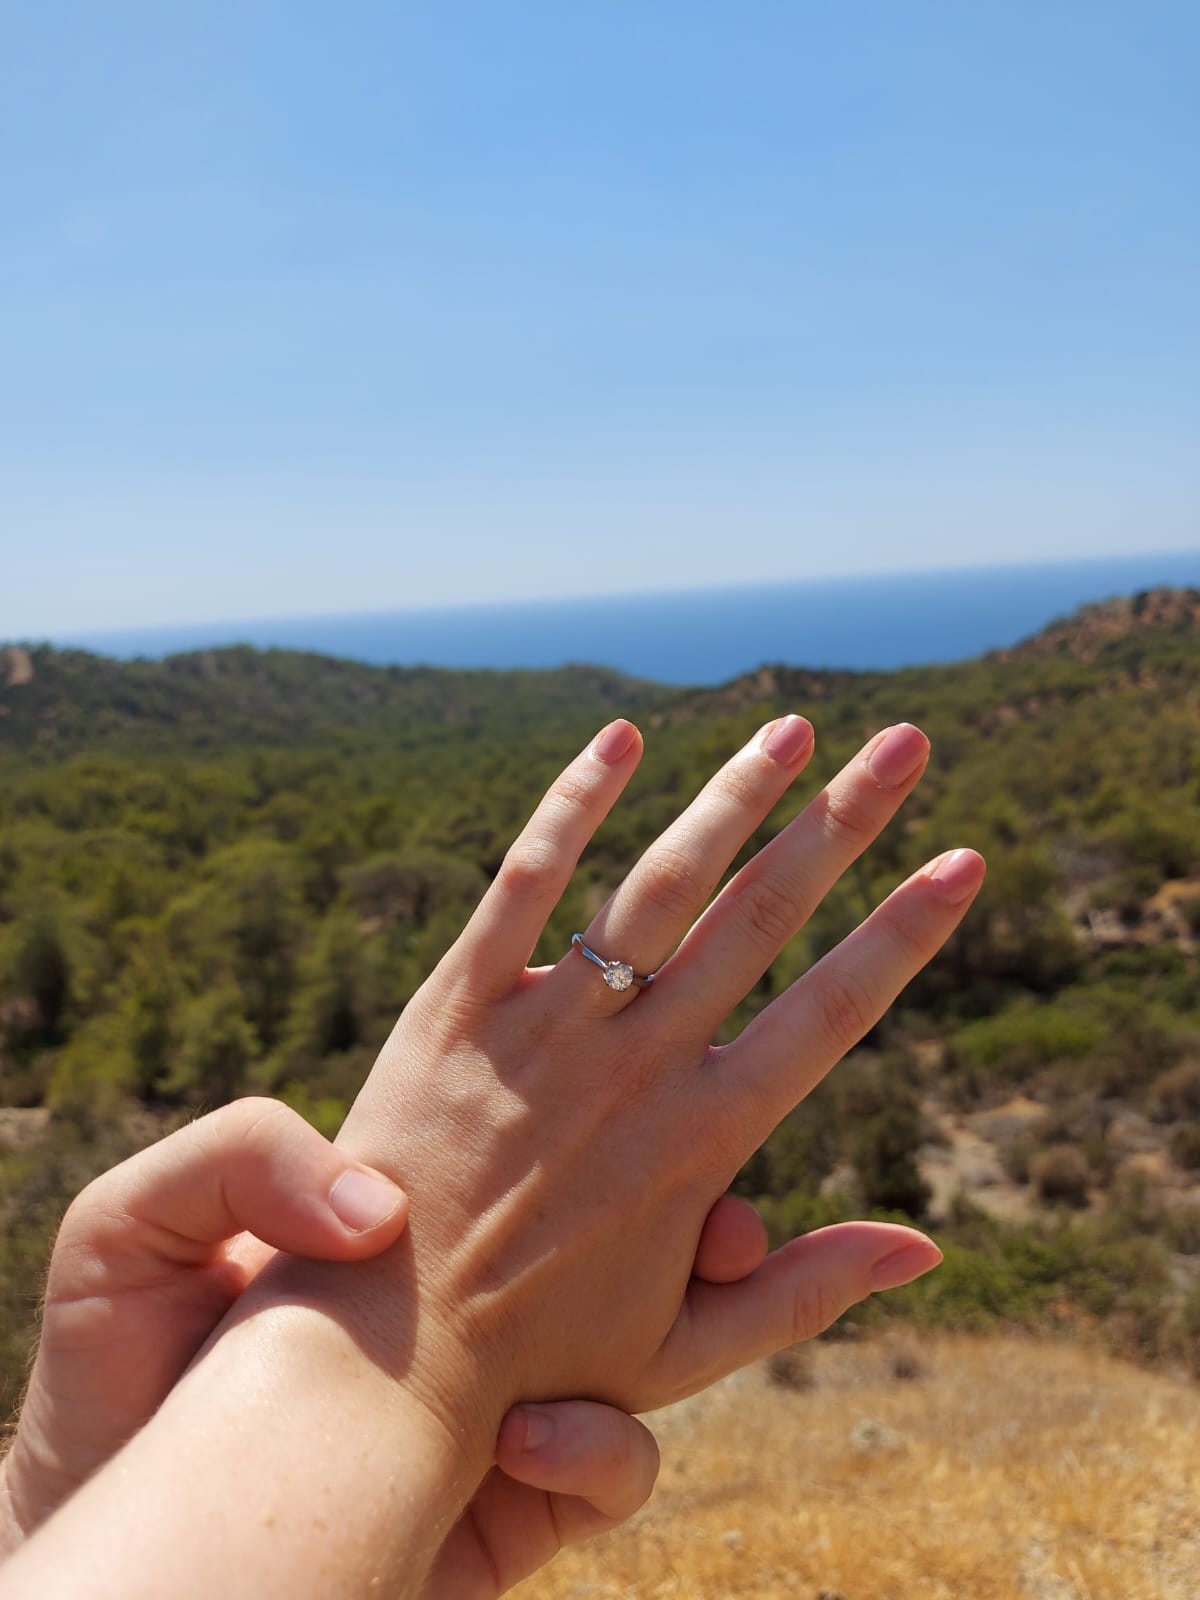 Ben & Tilly's Cyprus Proposal Story - Not Your Average Engagement!